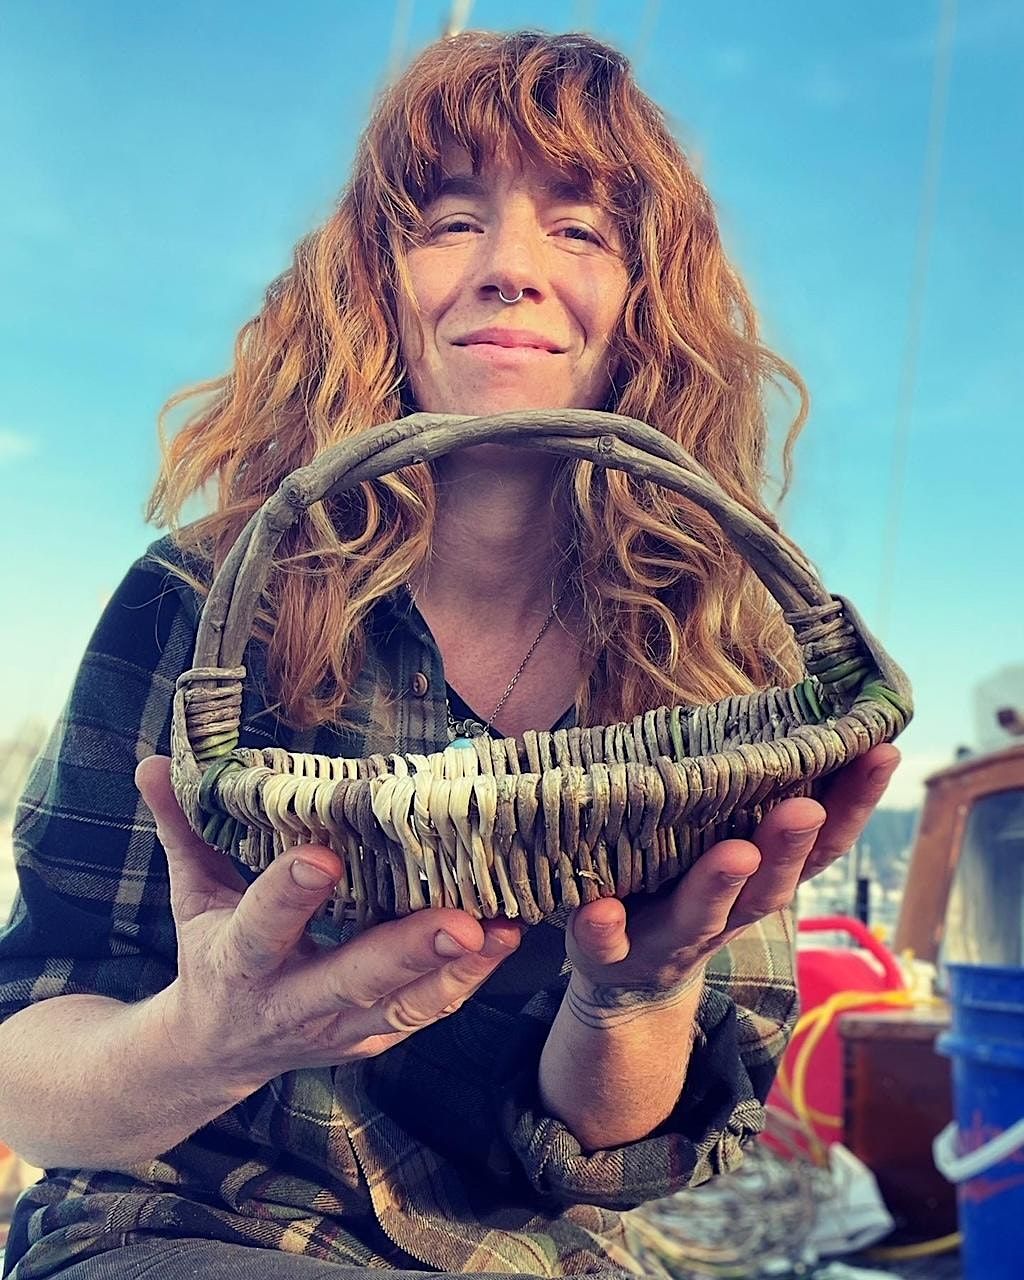 Basket Weaving with Invasives